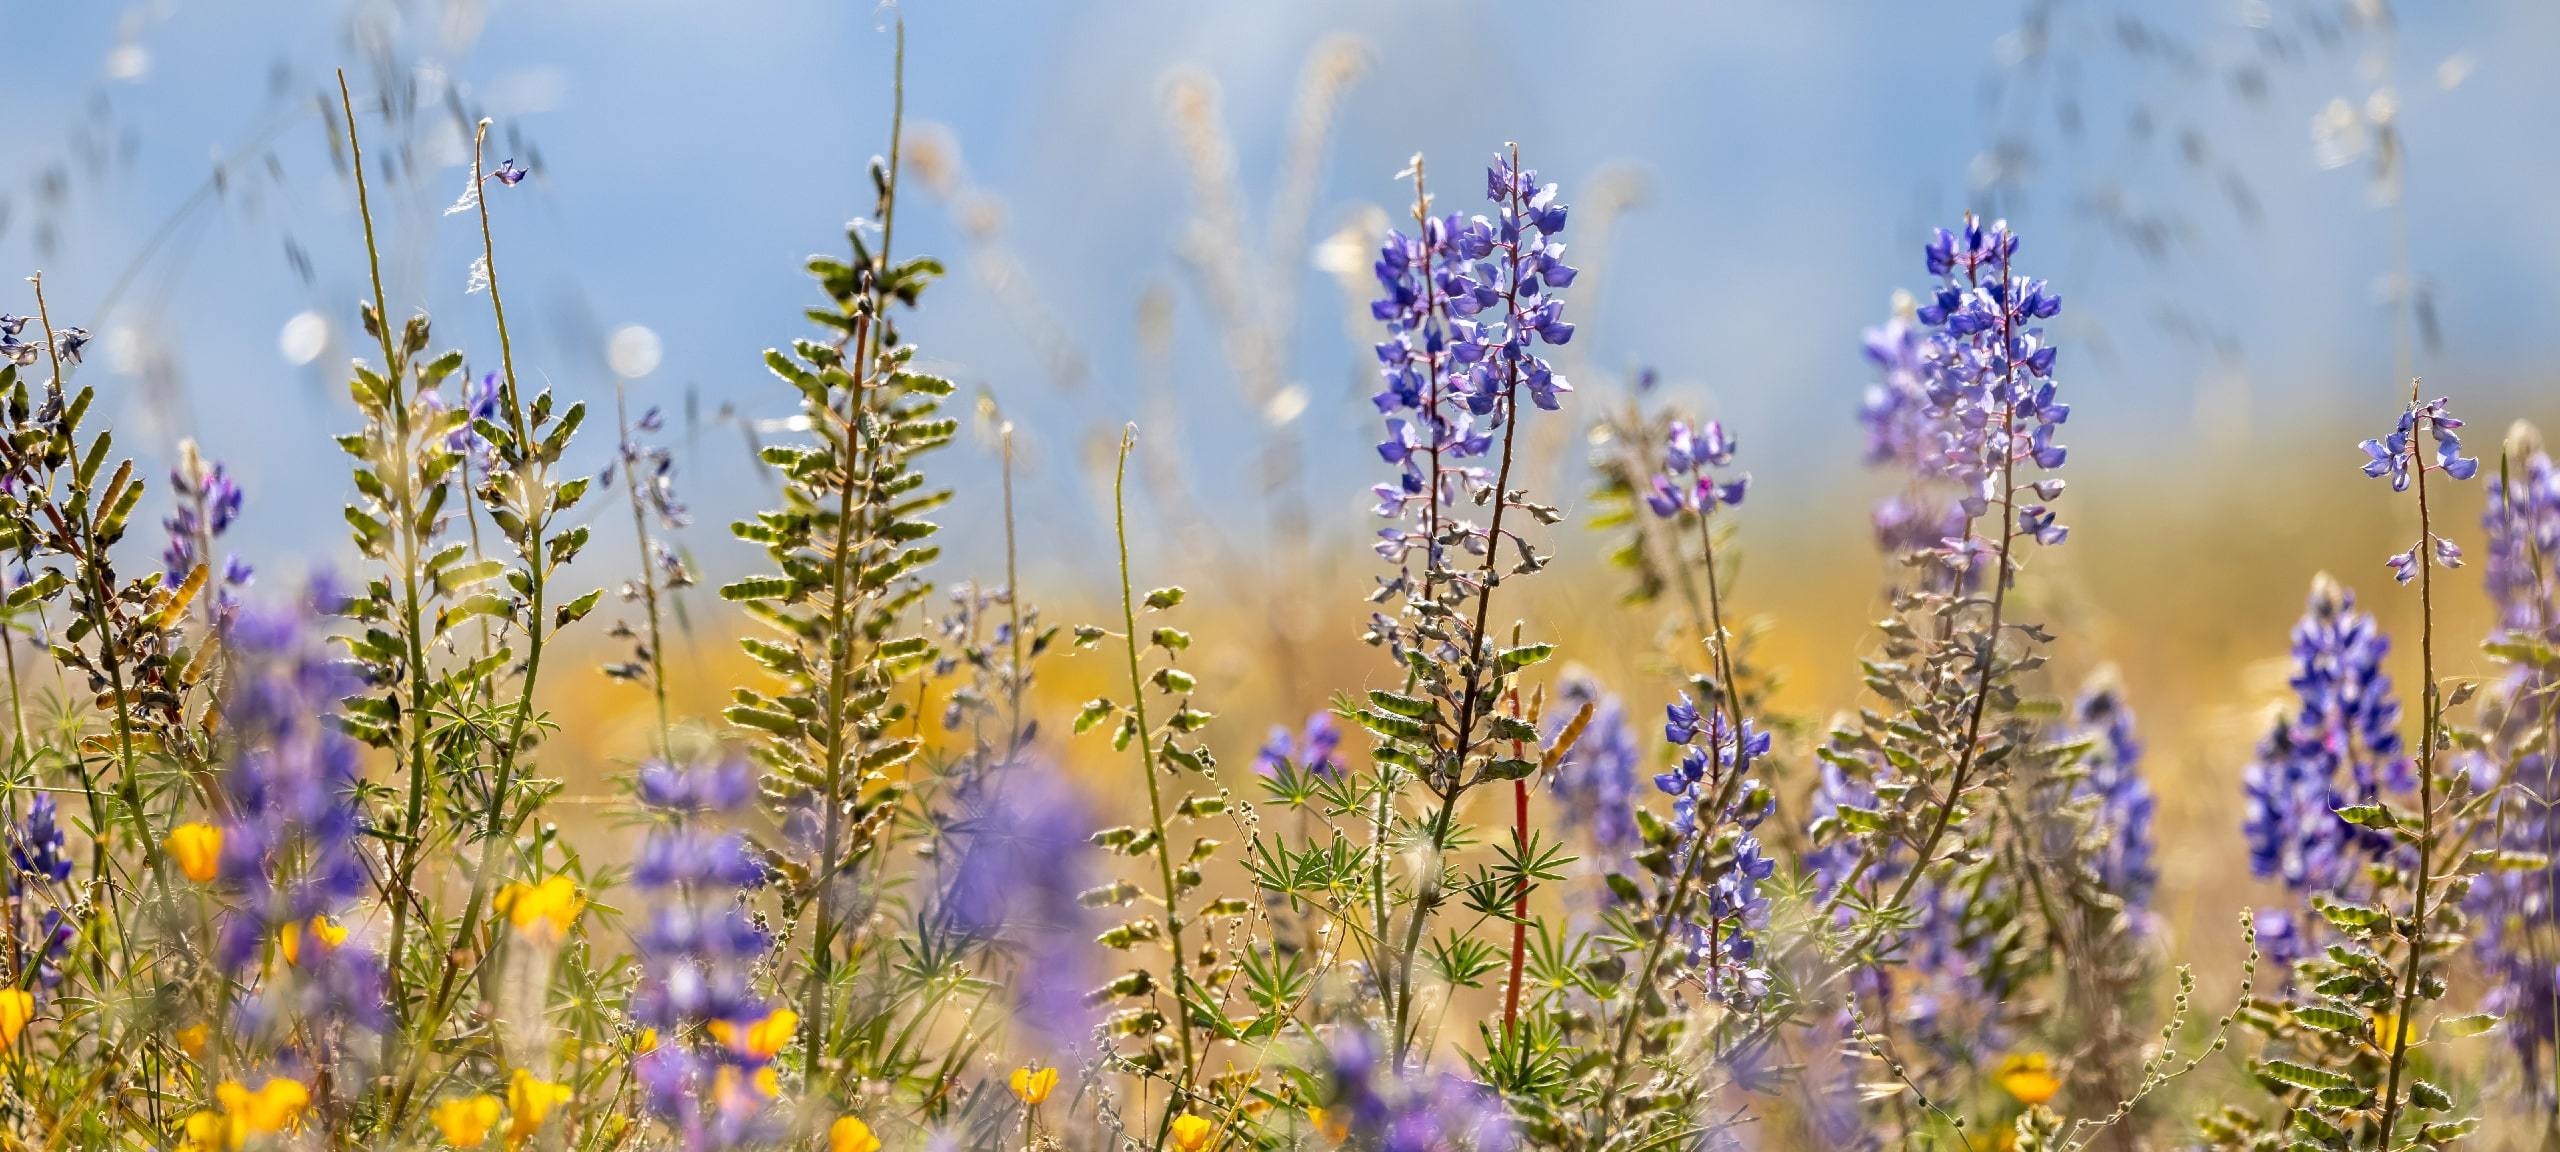 Field of Lupine flowers, typical of Scotts Valley Heights, CA area